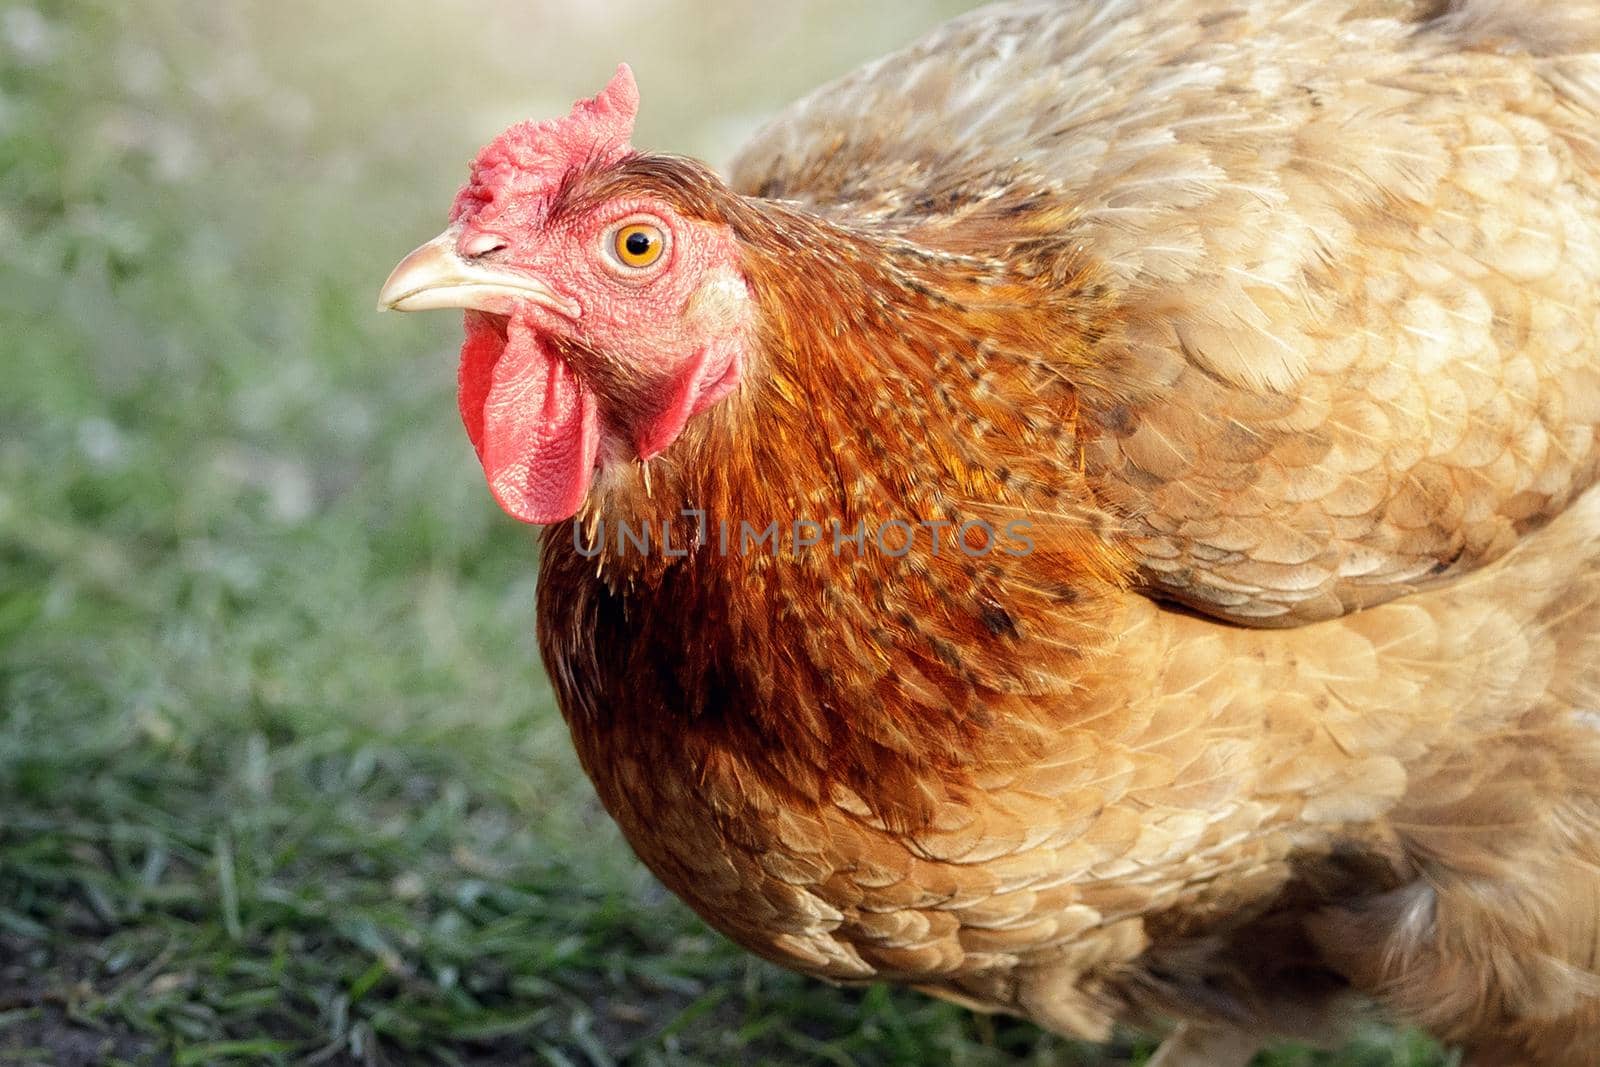 Close-up of an organically raised, free range hen, with grass in the background.